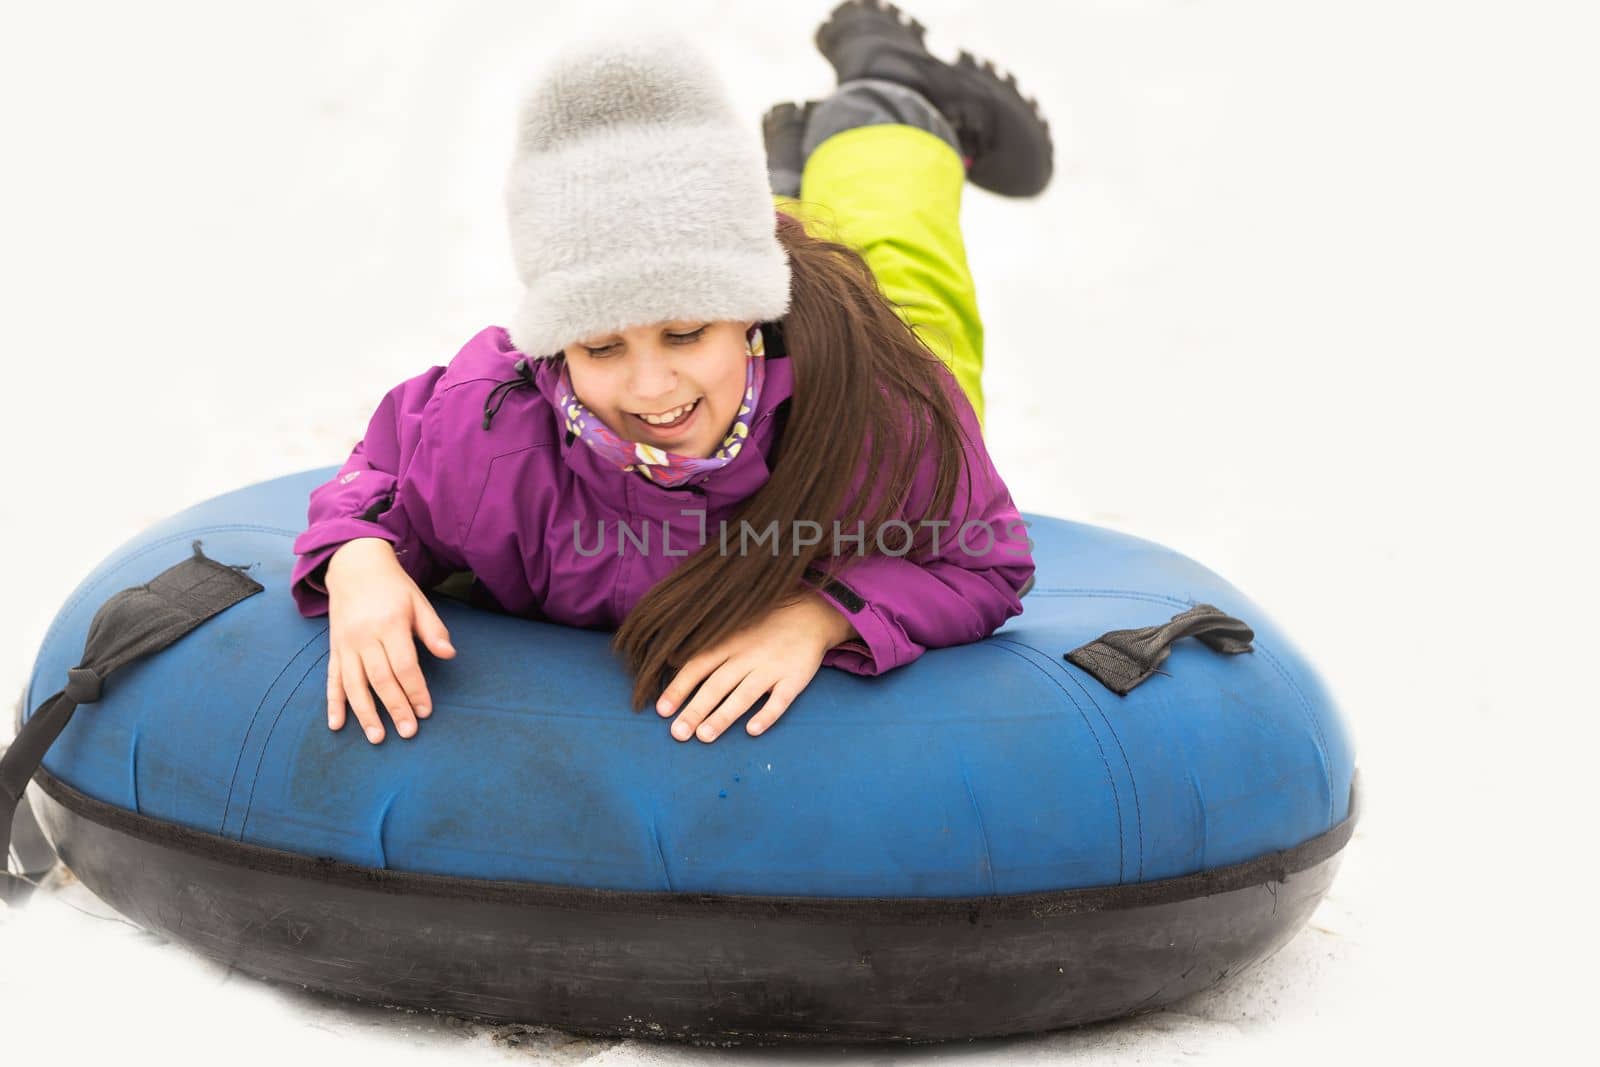 Active girl sliding down the hill on snow tube. Cute little happy child having fun outdoors in winter on sledge . Healthy excited kid tubing snowy downhill, family winter time.